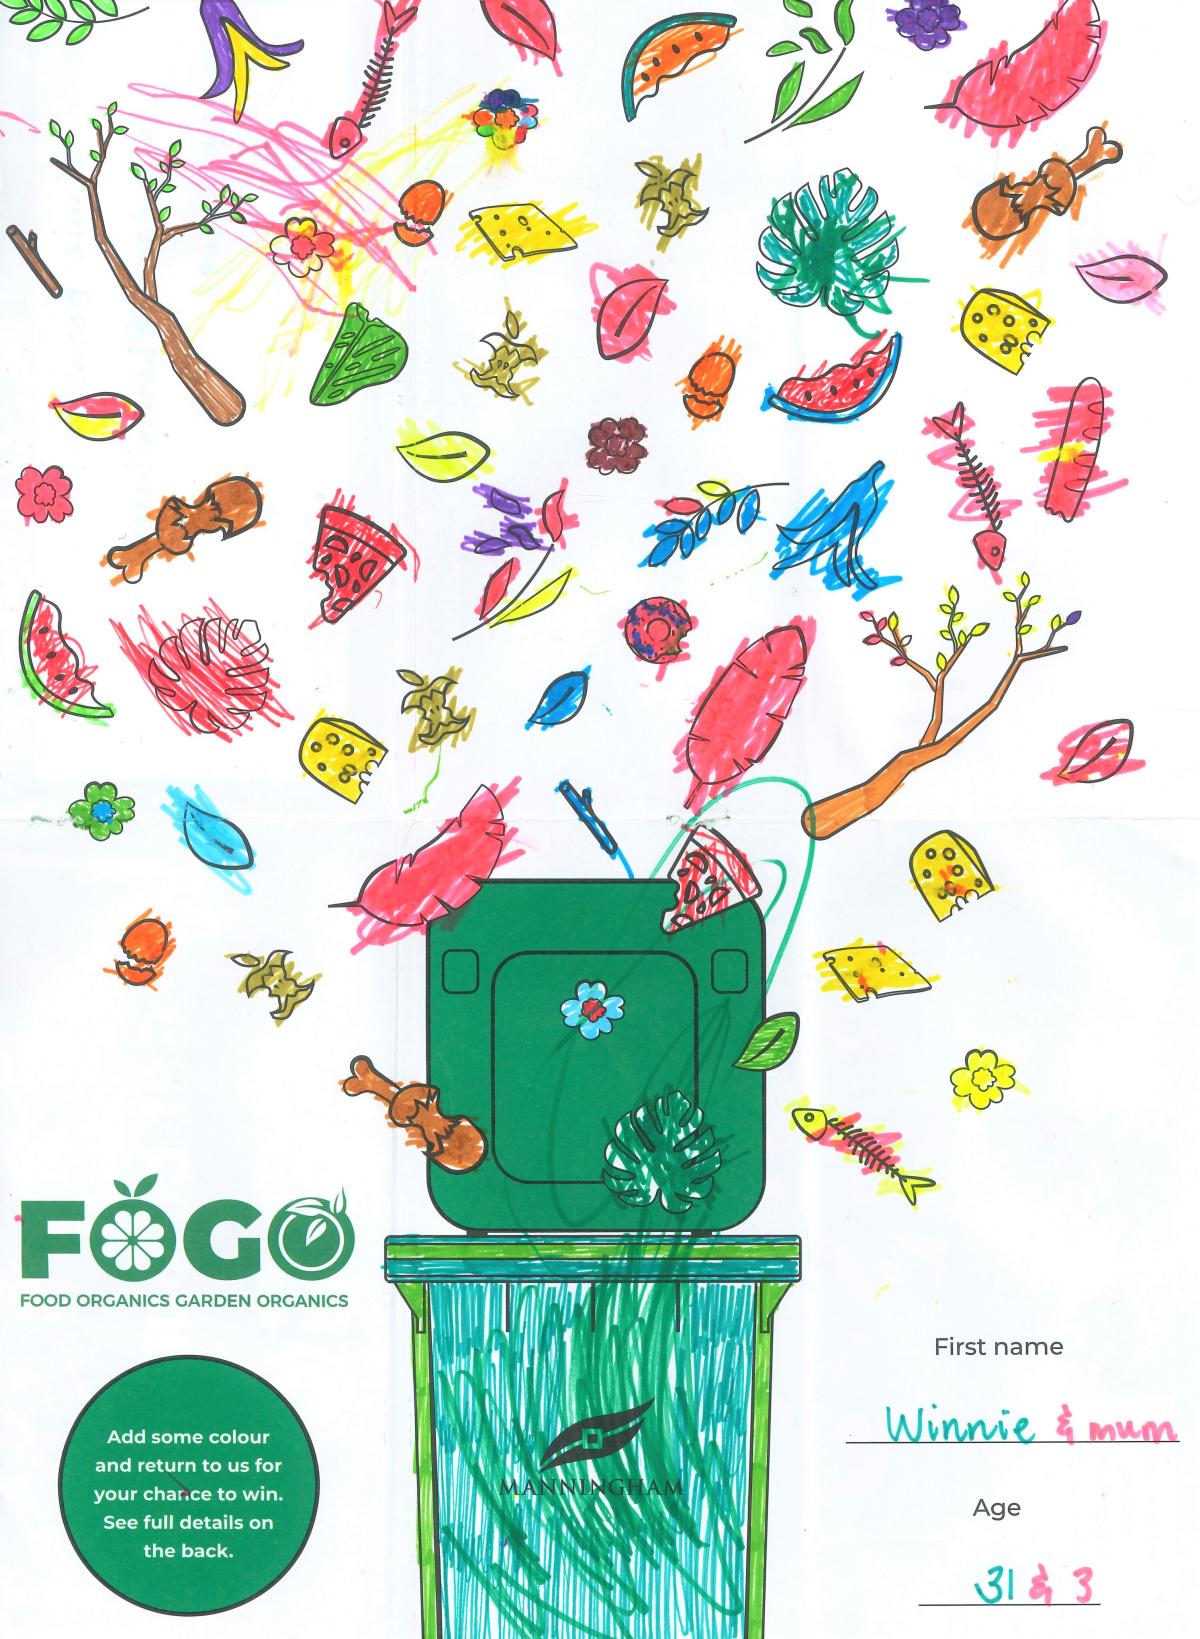 An image of a FOGO bin with all sorts of organic rubbish falling into it from above. The name 'Winnie' is in the bottom right corner.